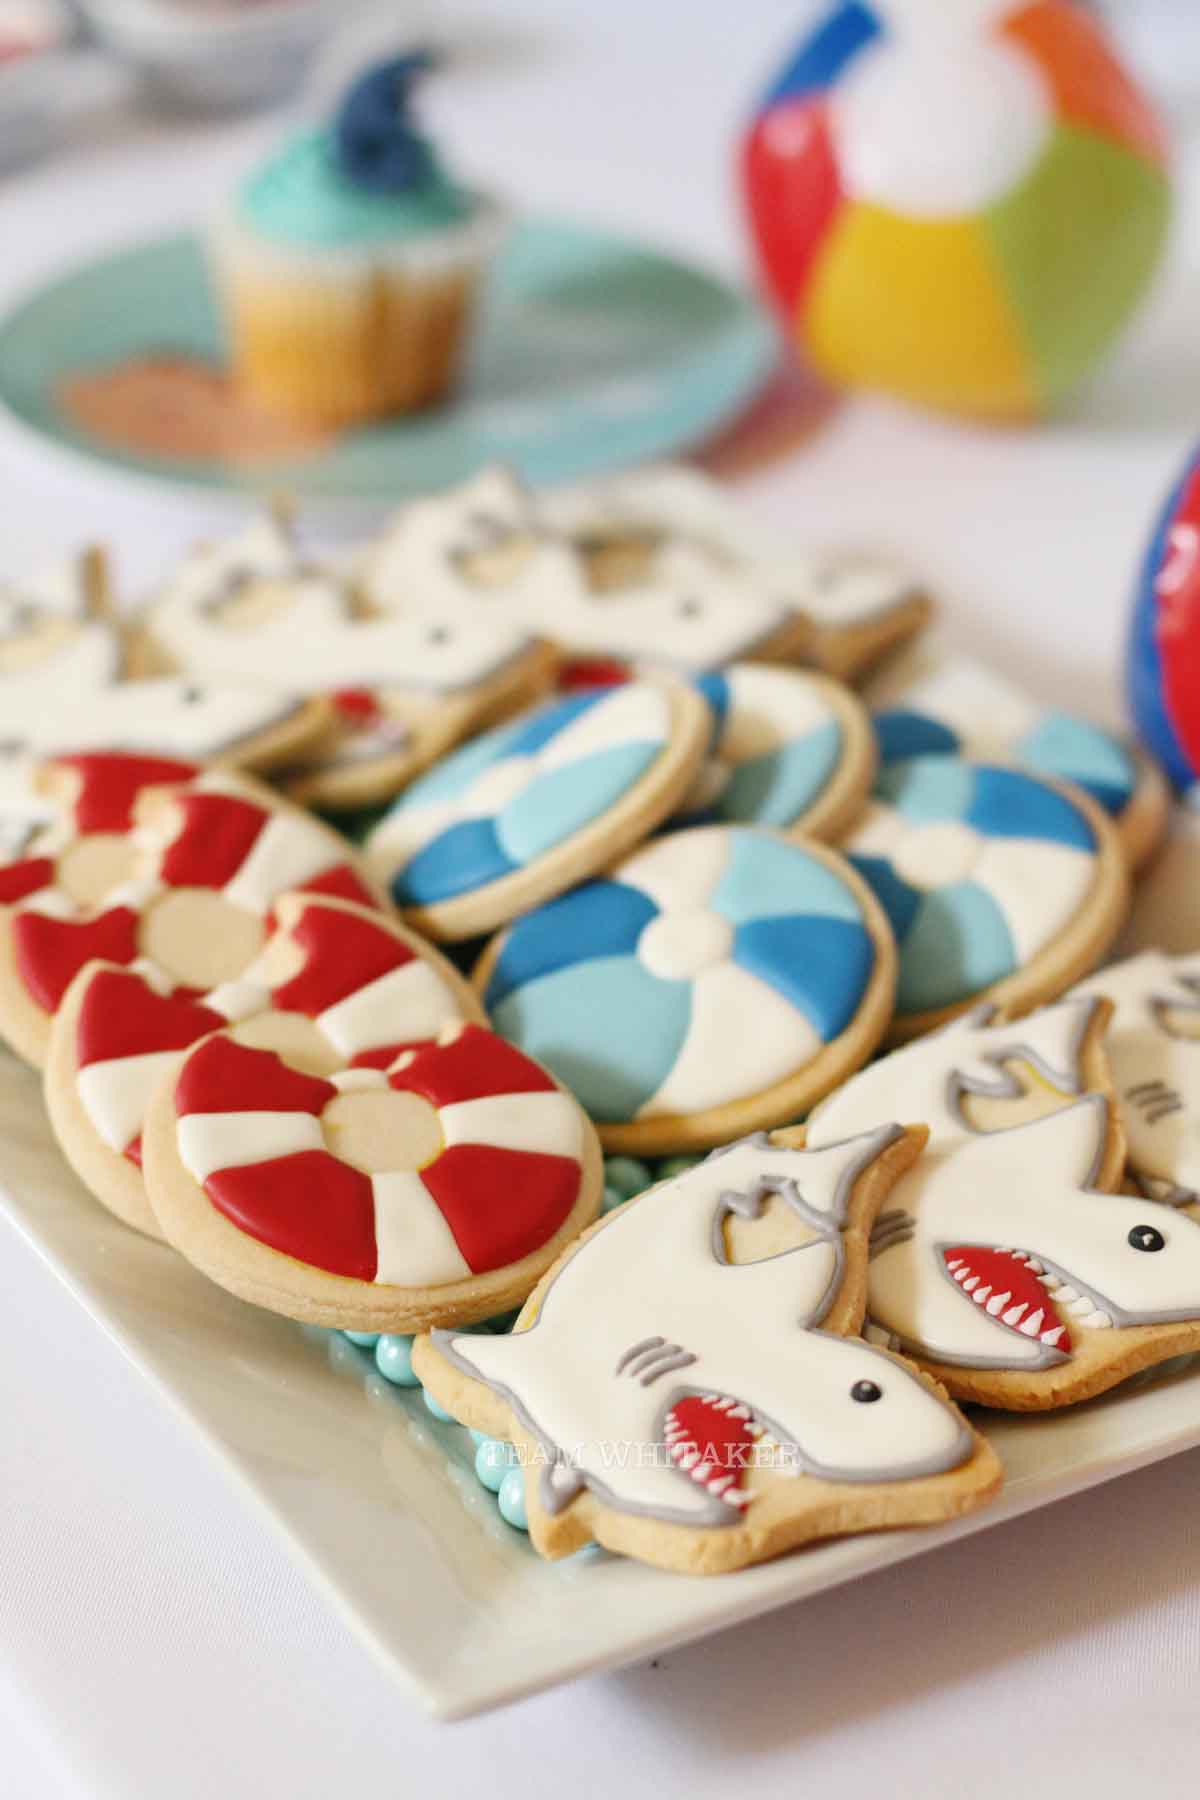 Looking for a fin-tastic birthday theme? This shark birthday party is perfect for the little boy in your life. It's full of creative party favors, shark-themed food and fun water games. Time to get your bite on. Chomp! Chomp!